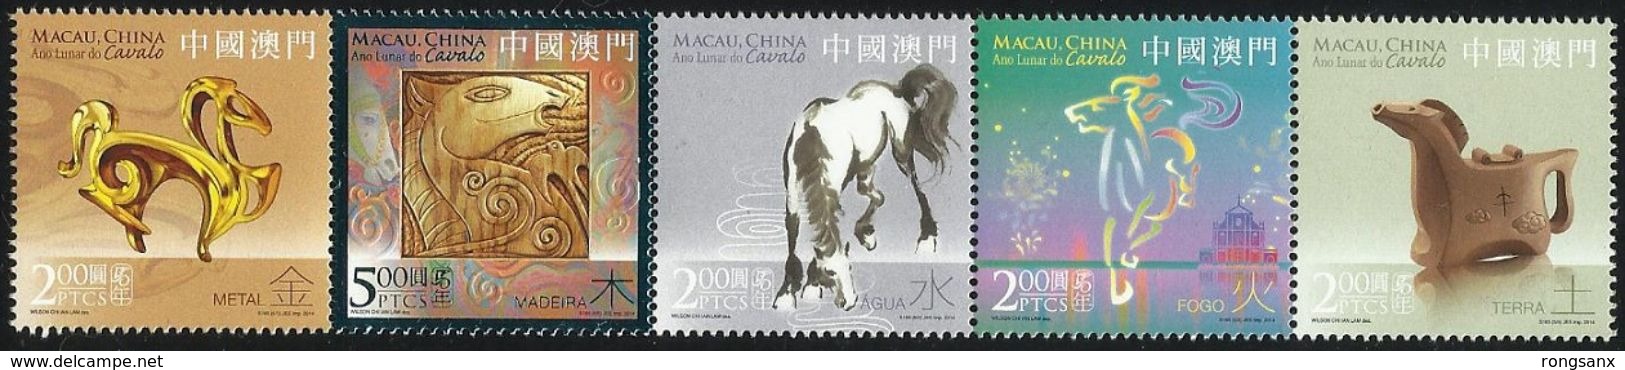 2014 MACAO/MACAU YEAR OF THE HORSE STAMP 5V - Unused Stamps